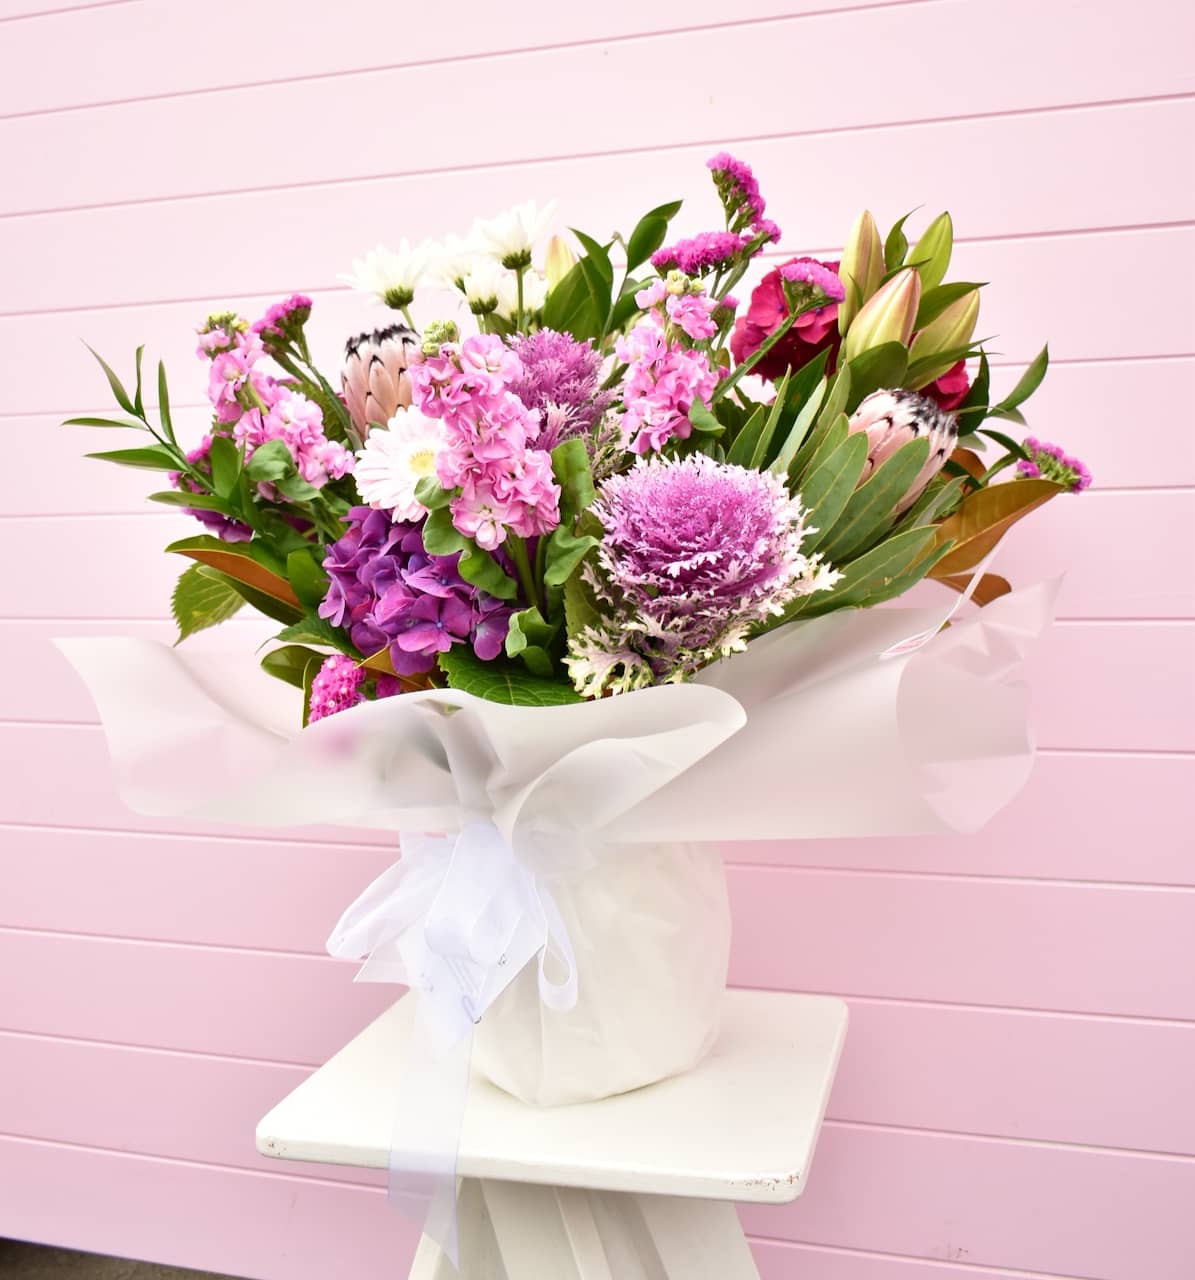 White vase with large purple and green flower arrangement against a pink back ground